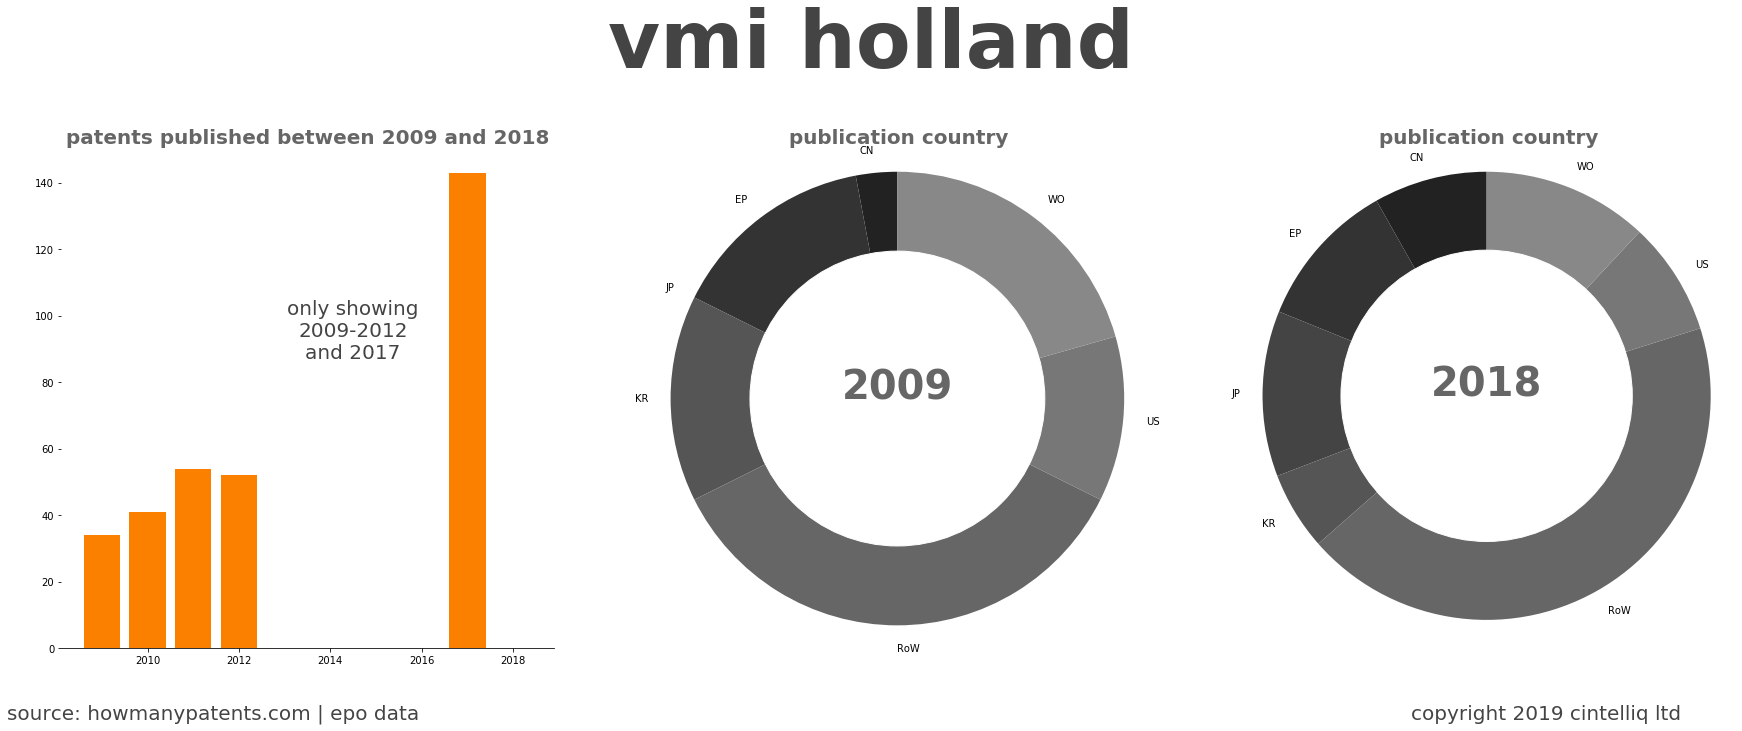 summary of patents for Vmi Holland